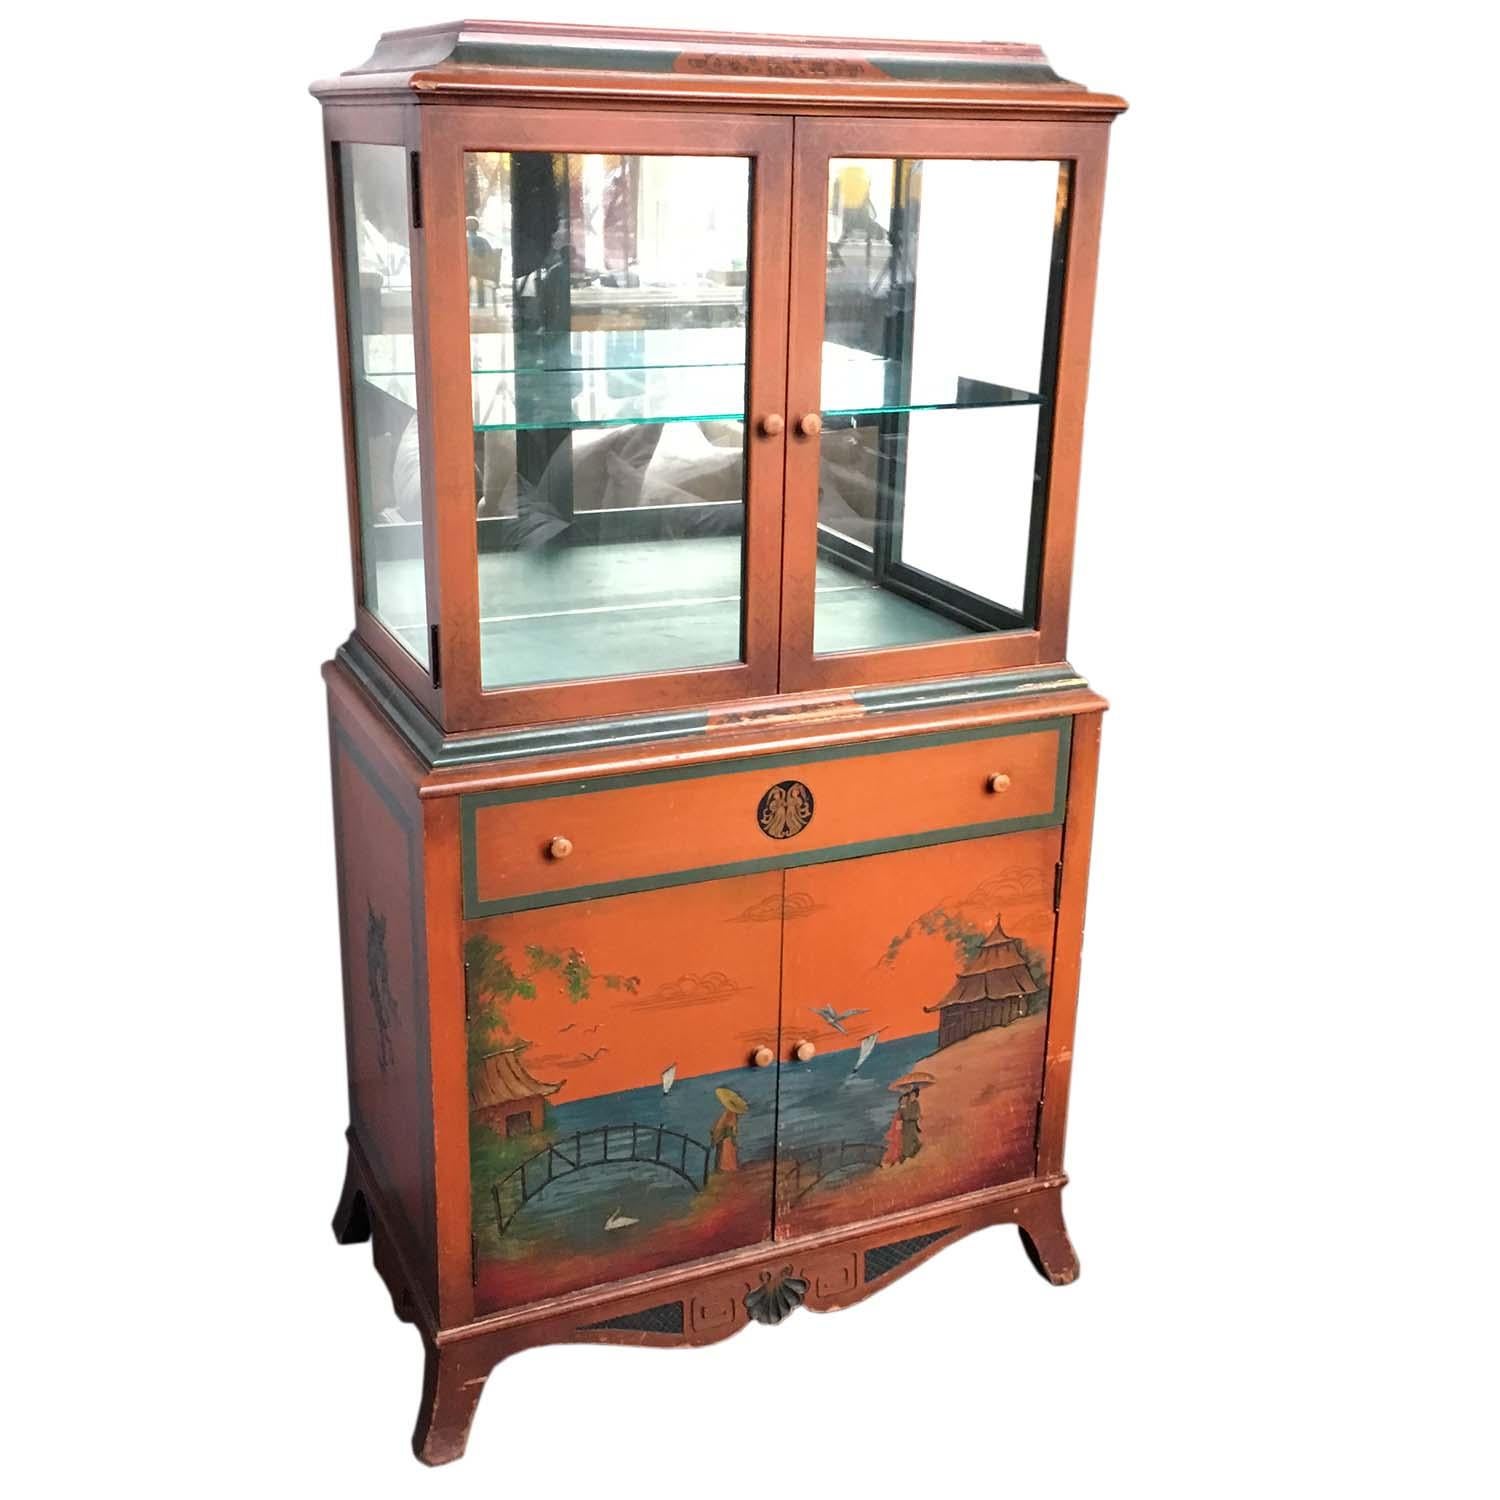 A vintage chinoiserie display case with a top drawer (27.25